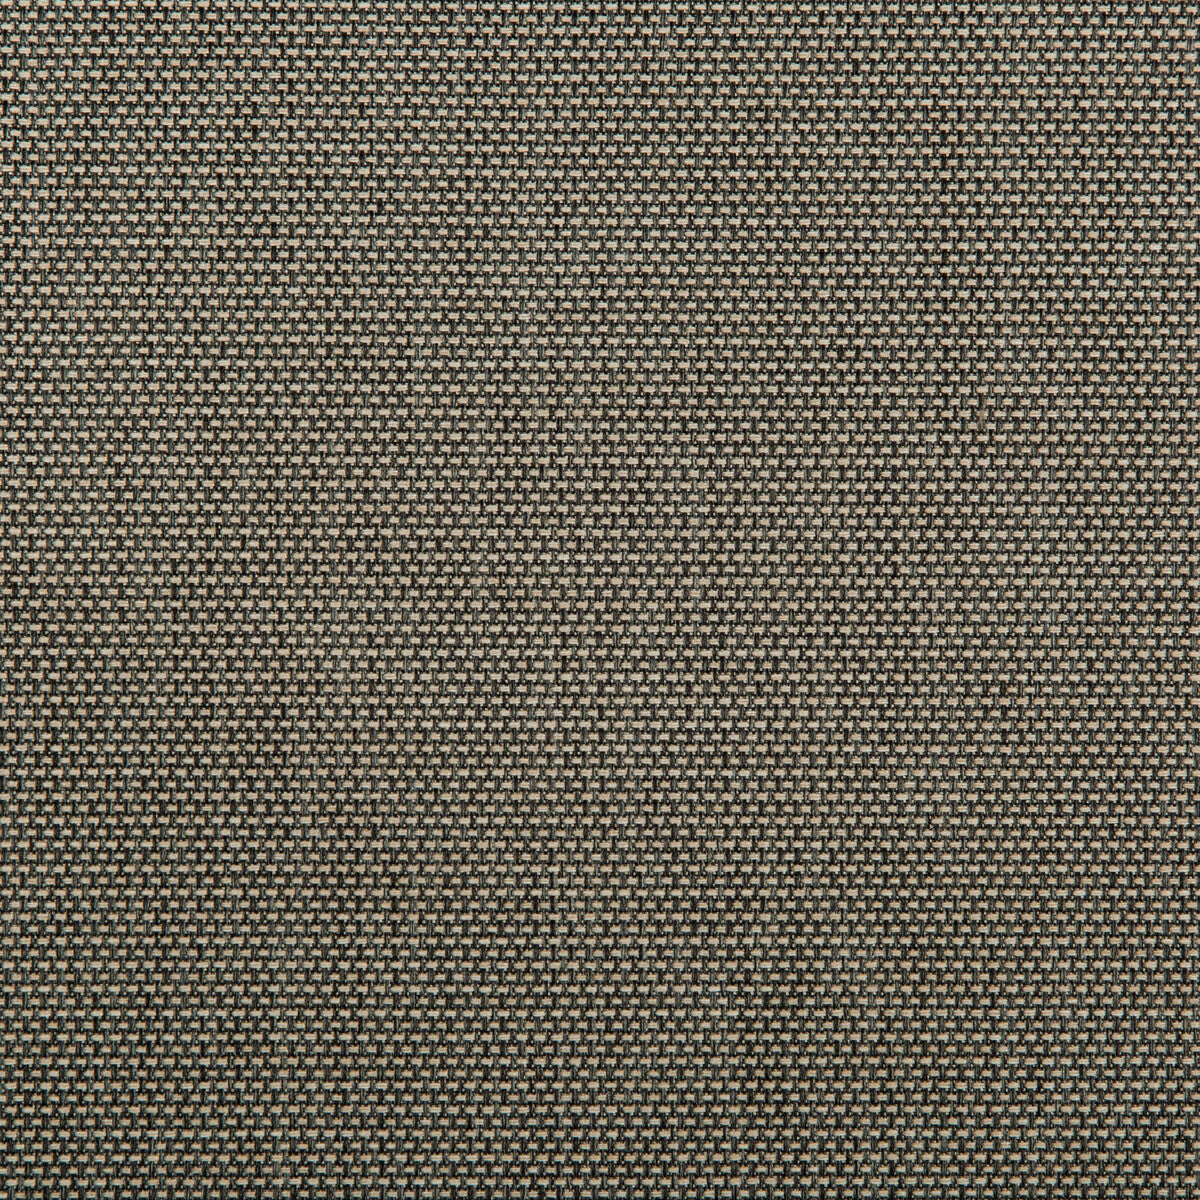 Kravet Contract fabric in 4645-1621 color - pattern 4645.1621.0 - by Kravet Contract